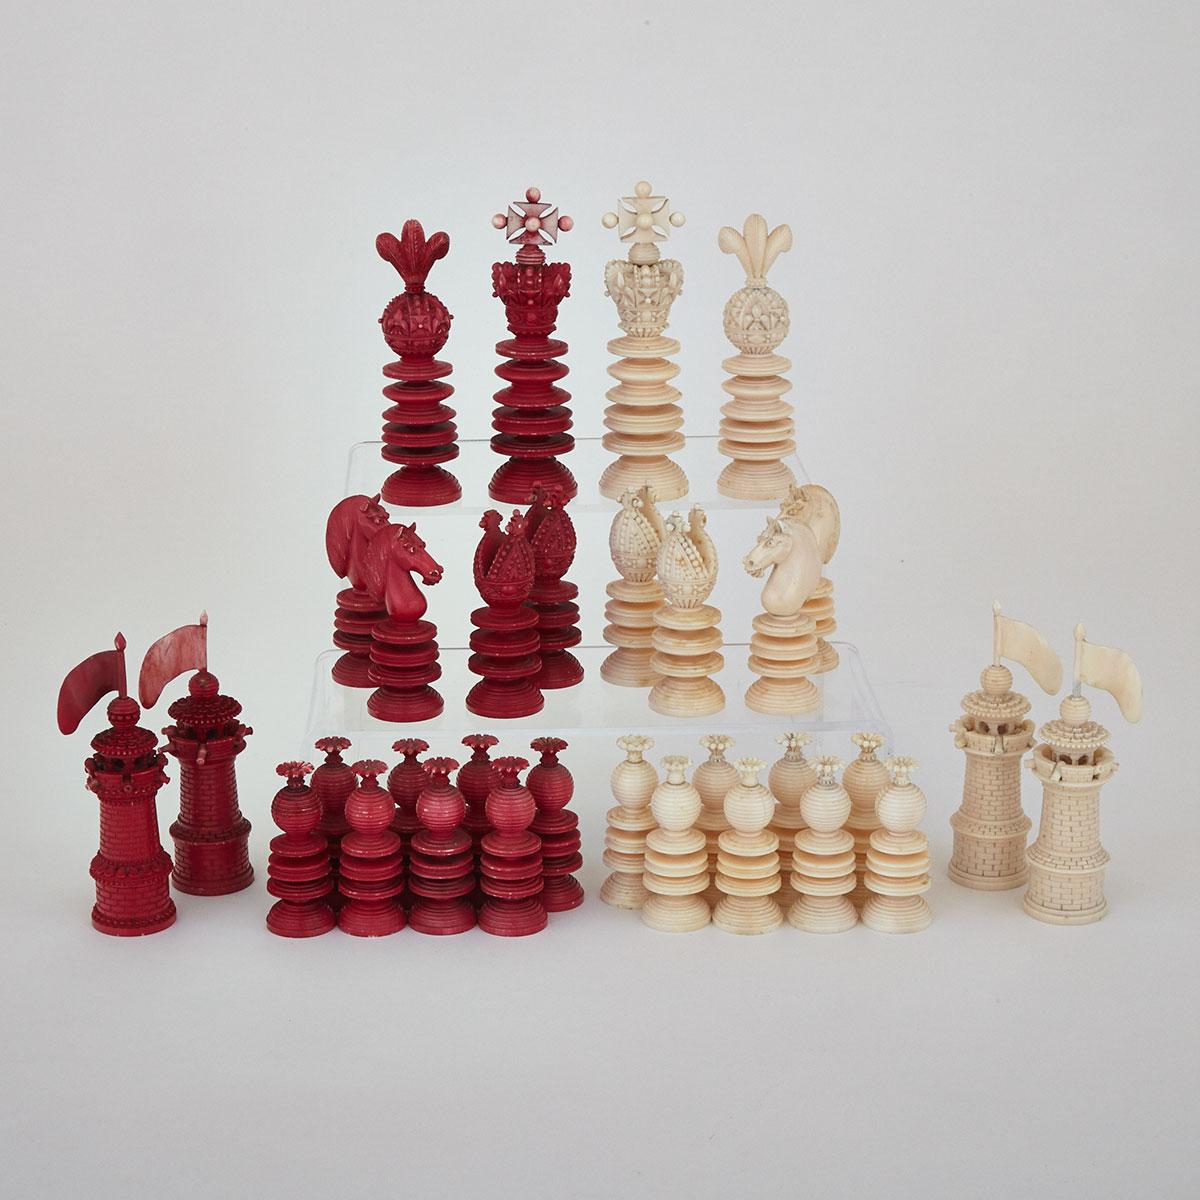 English Turned and Carved Ivory ‘Maltese’ Chess Set, mid 19th century